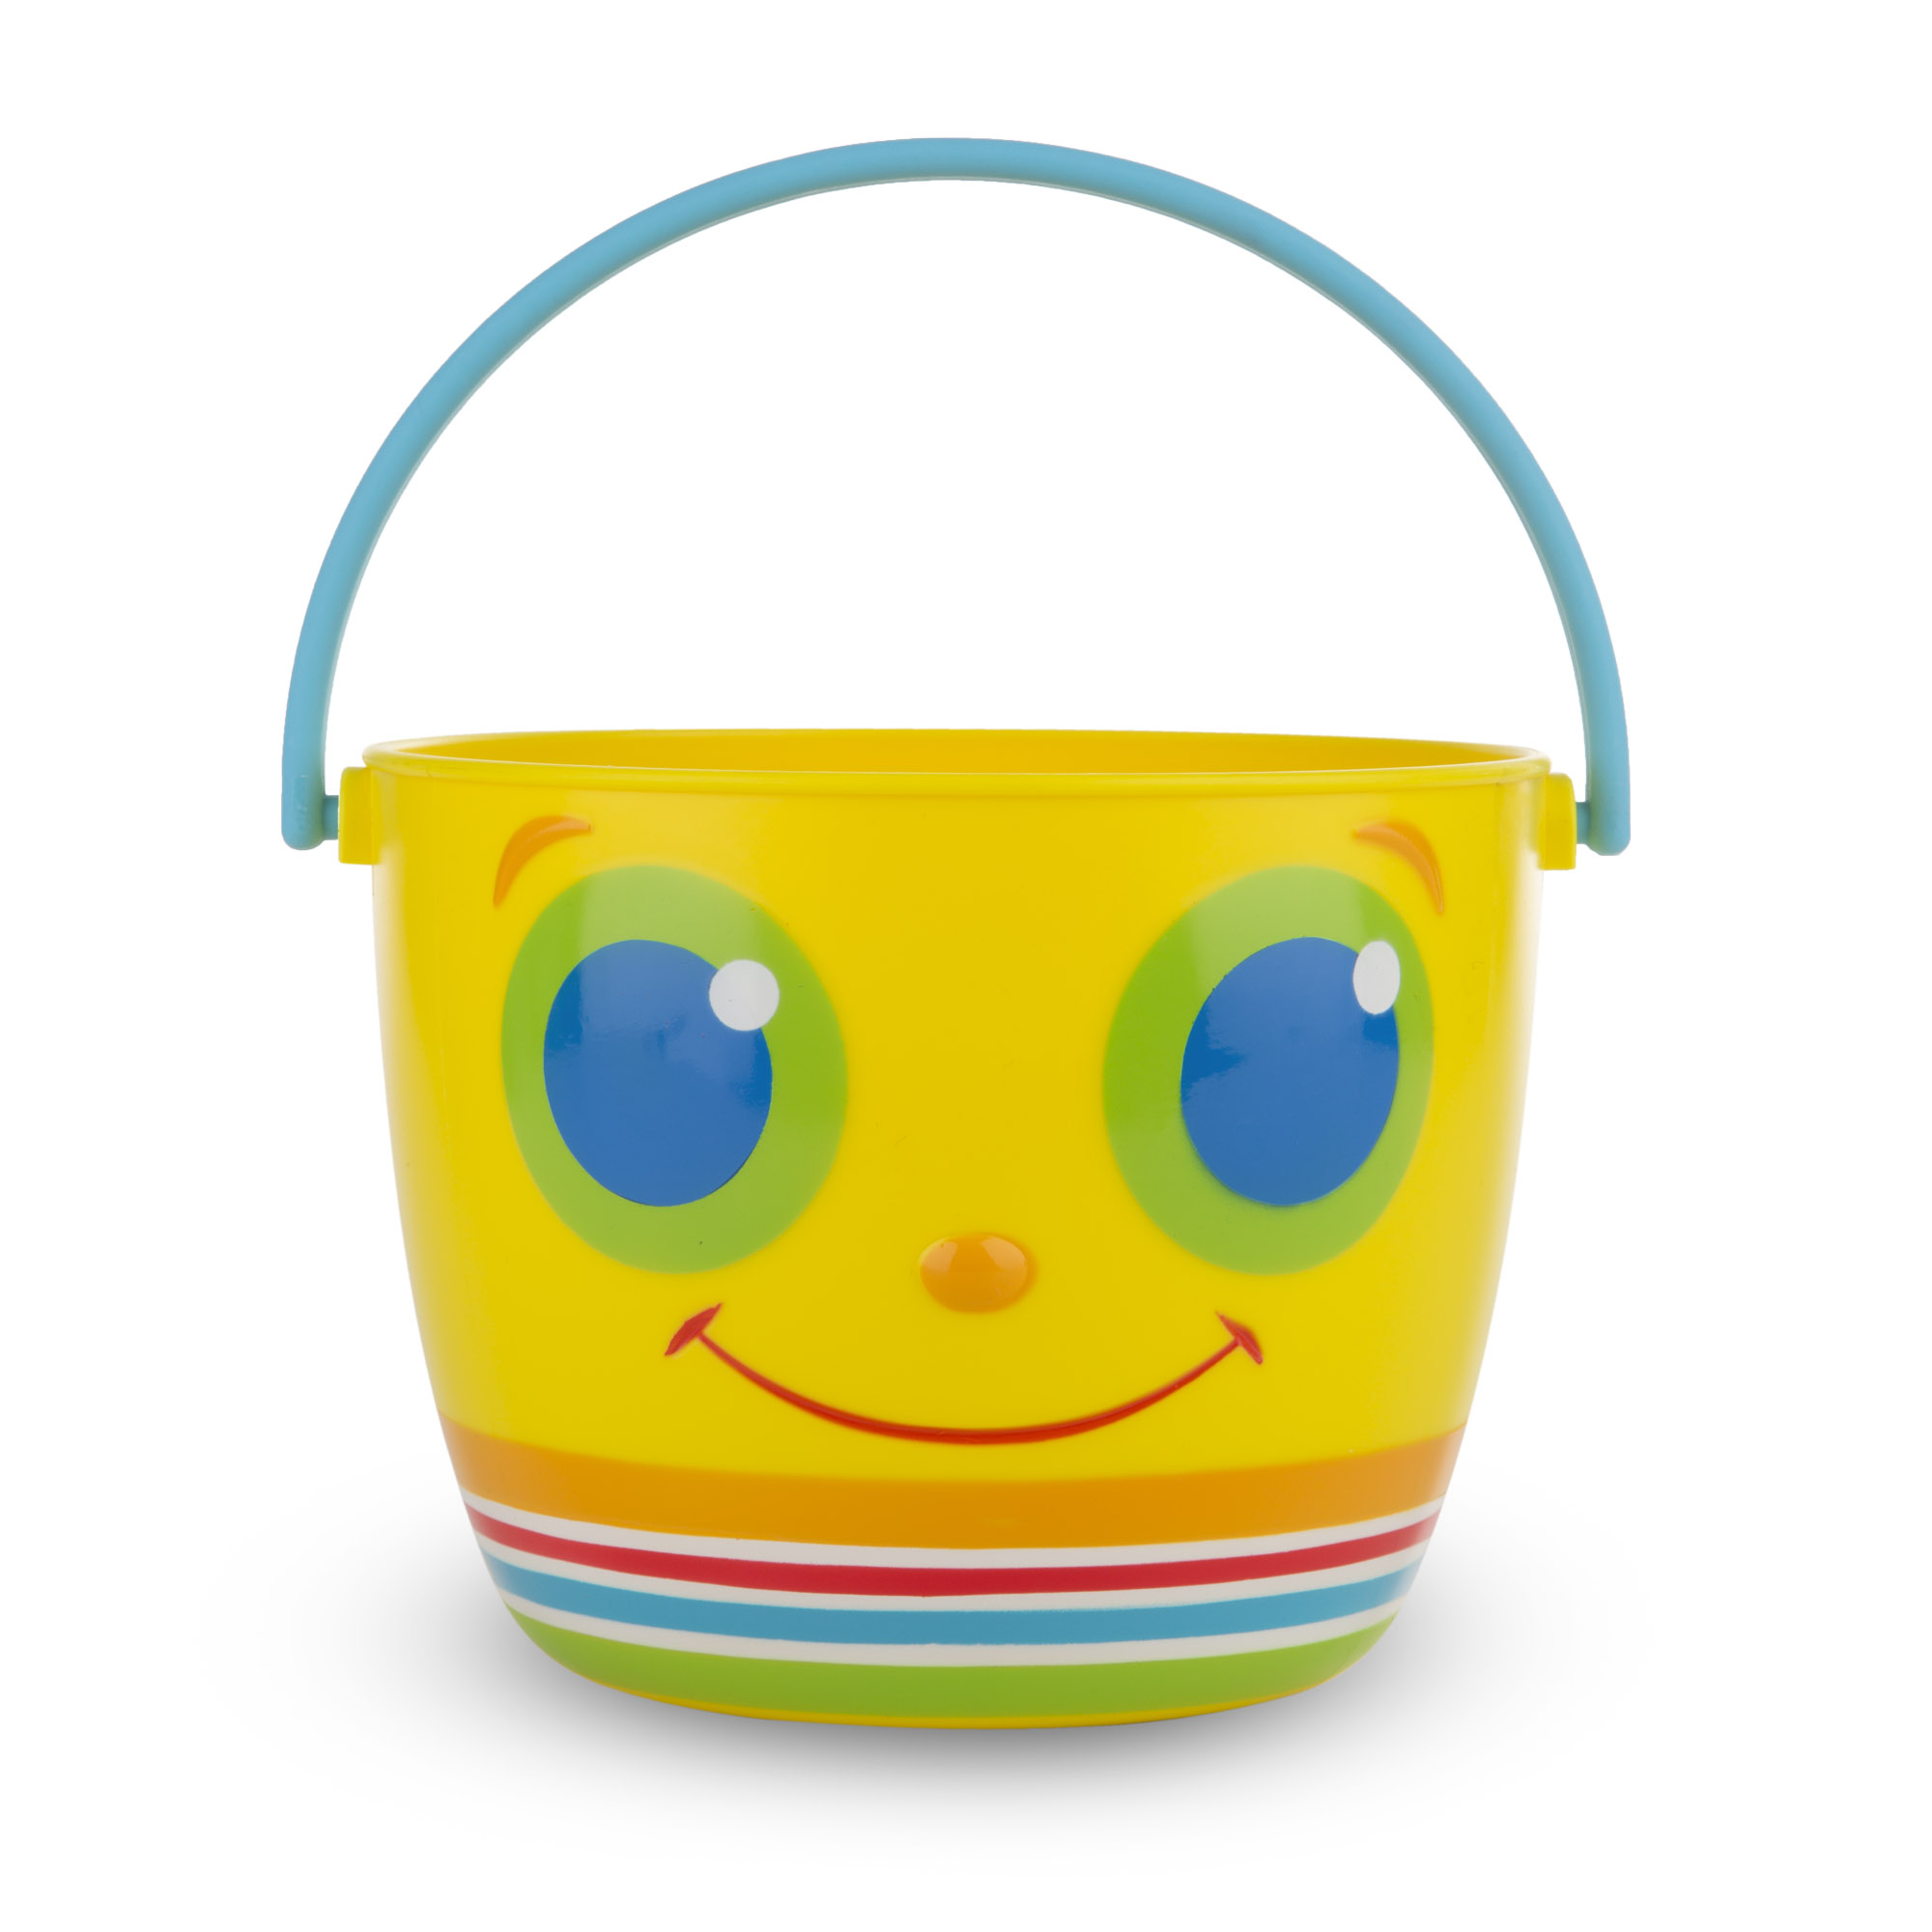 Melissa & Doug Sunny Patch Giddy Buggy Pail - Outdoor Toy for Kids - image 1 of 2